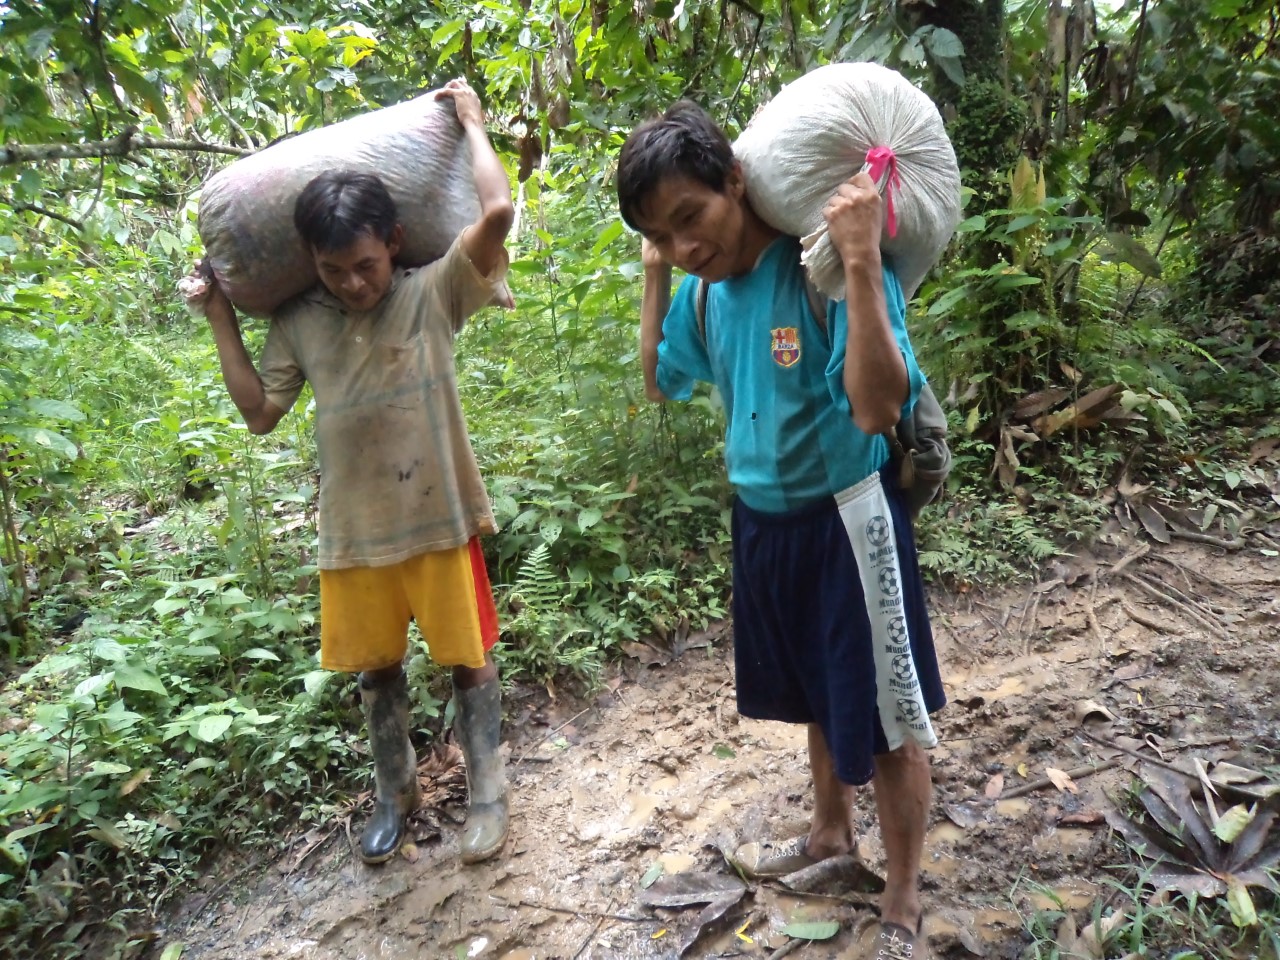 Carrying cacao through the jungle to the market